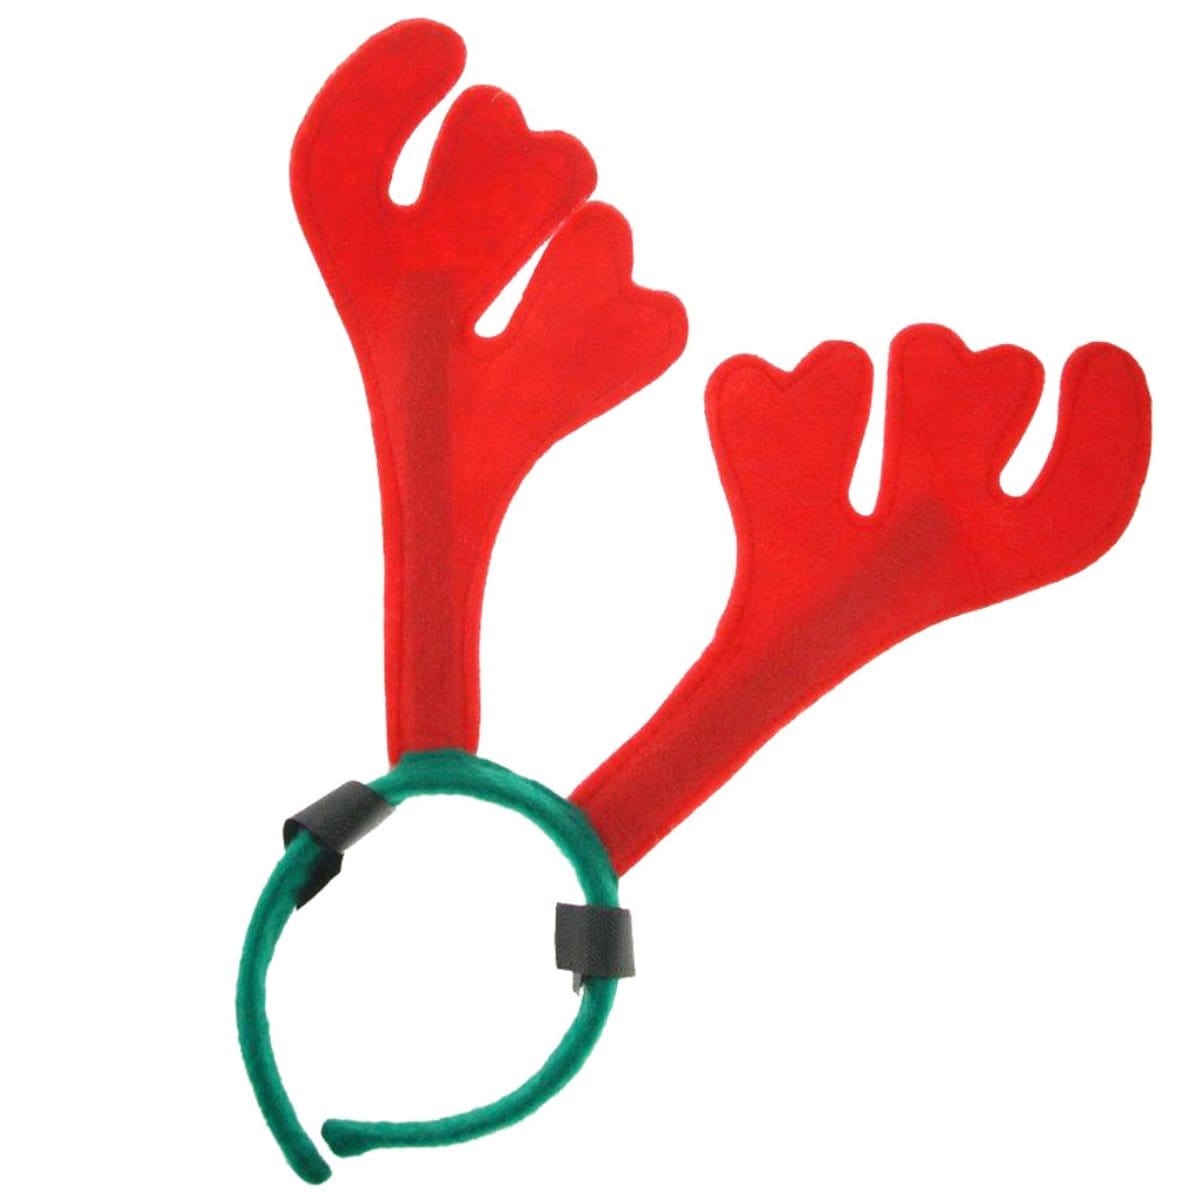 ShowQuest Antlers with Hoop and Loop Attachment